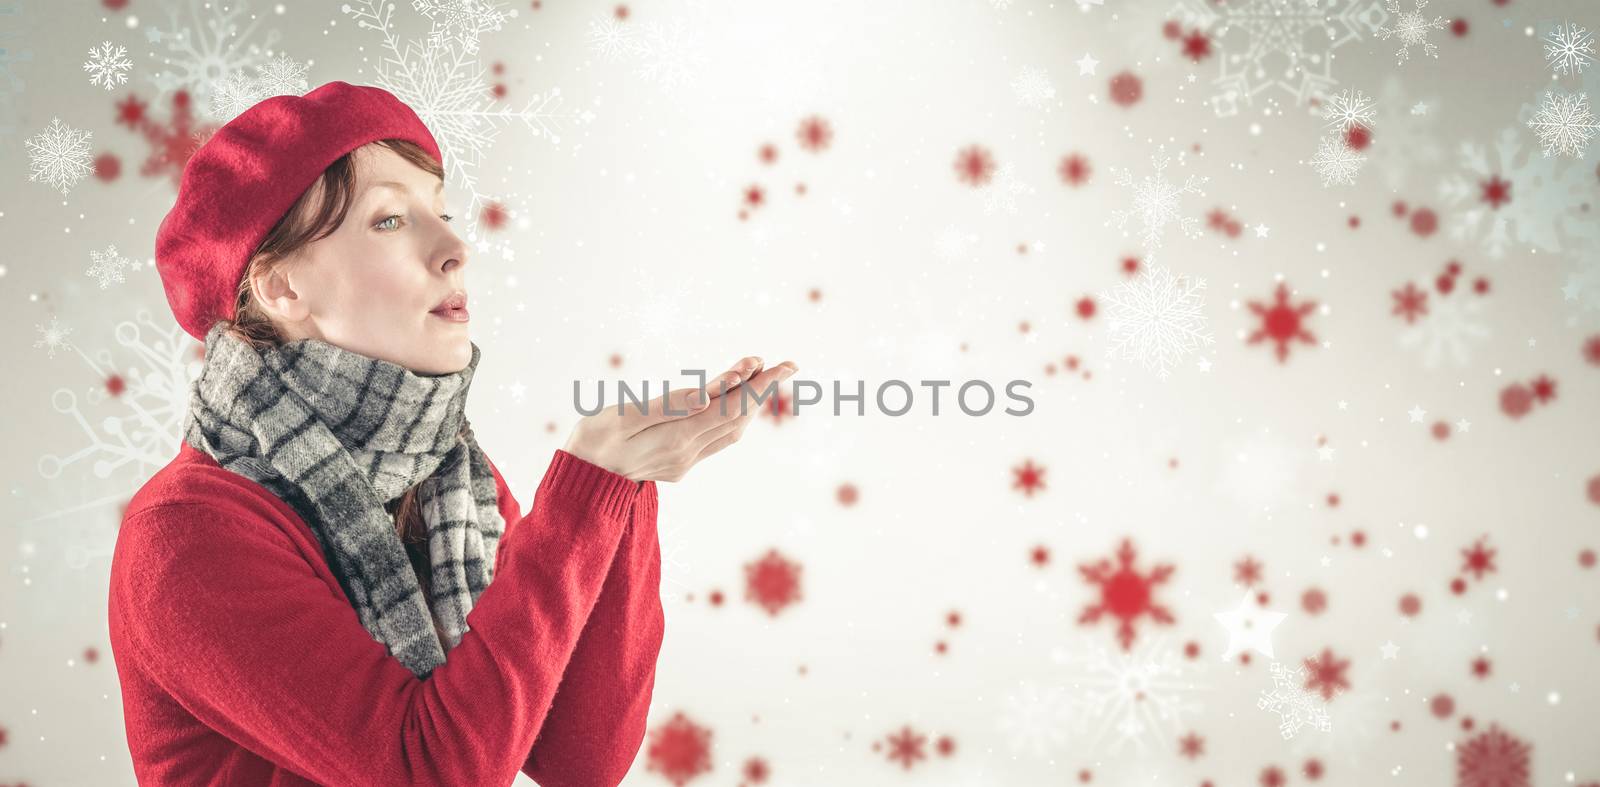 Composite image of woman blowing kiss from hands by Wavebreakmedia